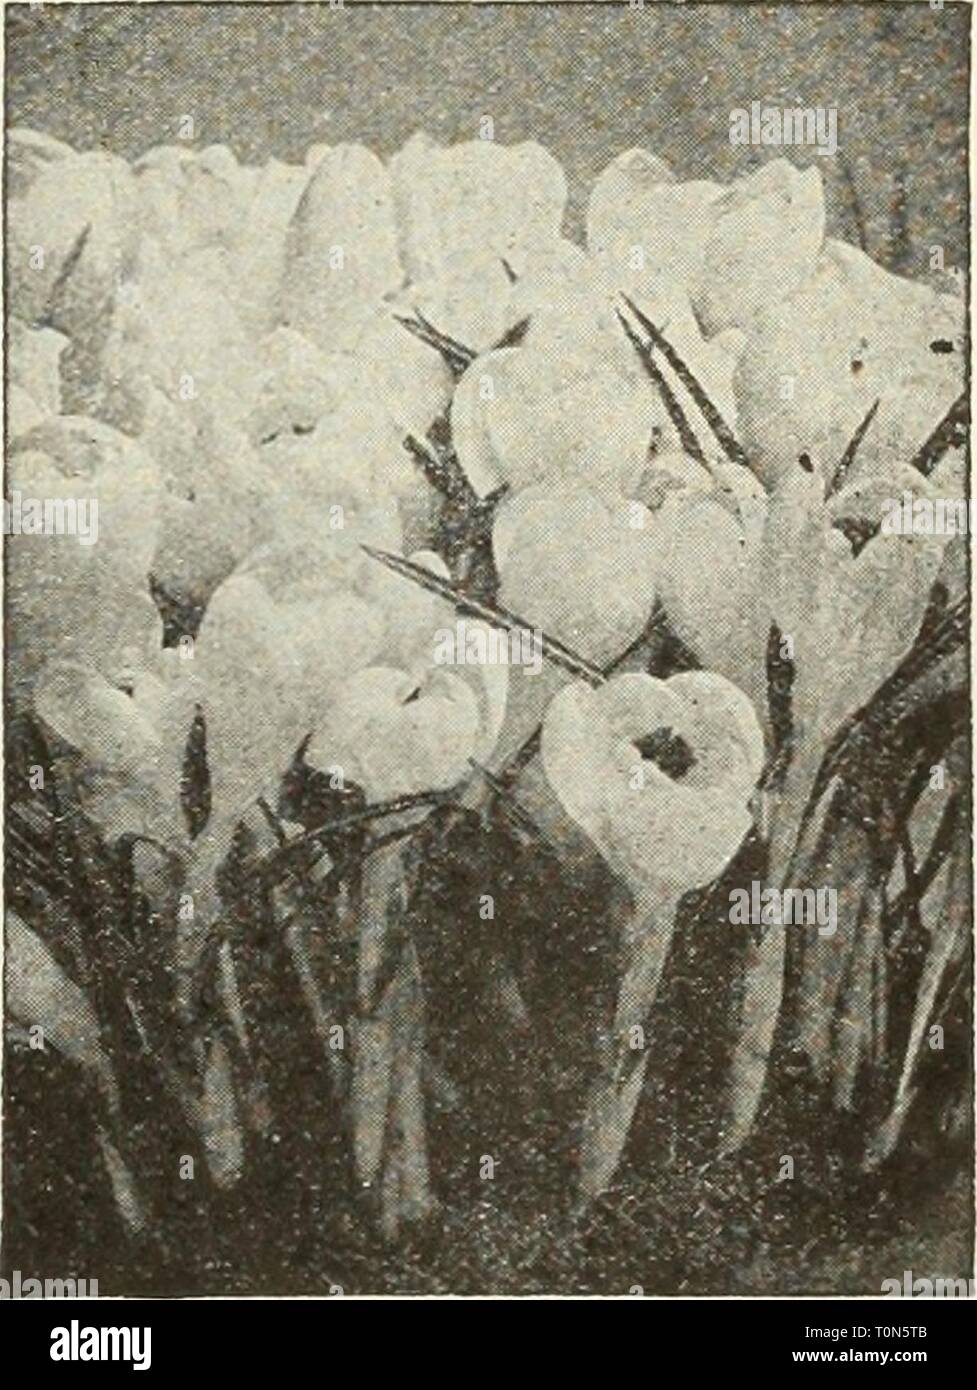 Dreer's bulbs  plants, shrubs, Dreer's bulbs : plants, shrubs, and seeds for fall planting  dreersbulbsplant1936henr Year: 1936  Chionodoxa sardensis Lovely rich blue flowers in early spnng    Crocus are one of our most indispensable spr ing flowers Collections of Giant-Flowering Crocus These collections contain the 6 Giant- Flowering varieties described above. They will give you a splendid spot of color in your garden. 36 bulbs, 6 of each variety for $1.36 72 bulbs, 12 of each variety for 2.60 150 bulbs, 25of each variety for 4.76 300 bulbs, 50 of each variety for 9.00 All Bulbs are sent PREP Stock Photo